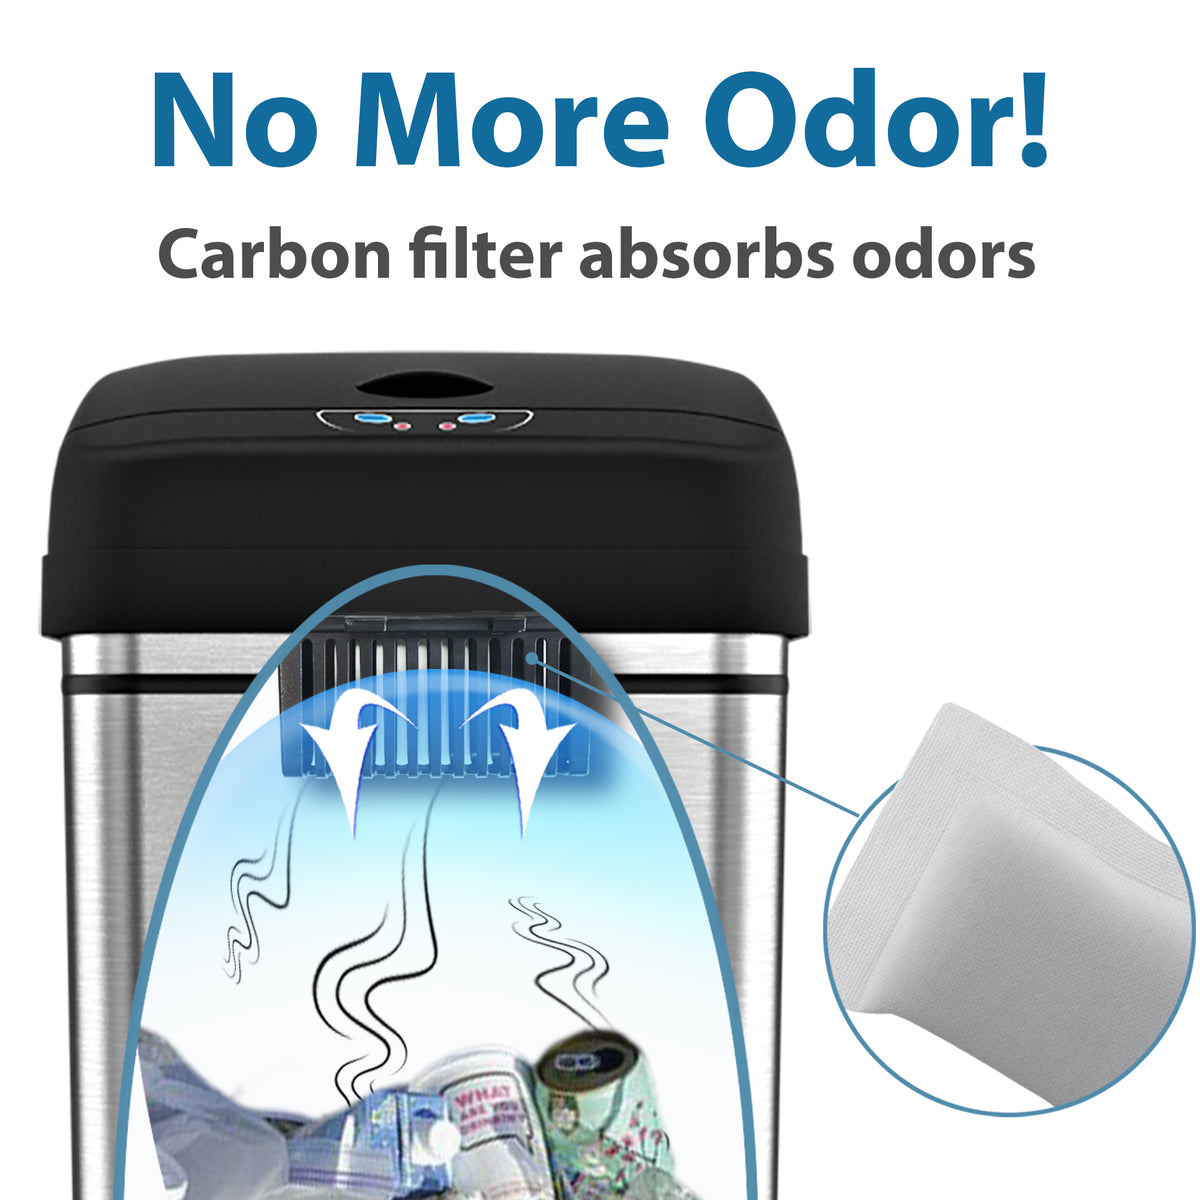 carbon filter absorbs odors